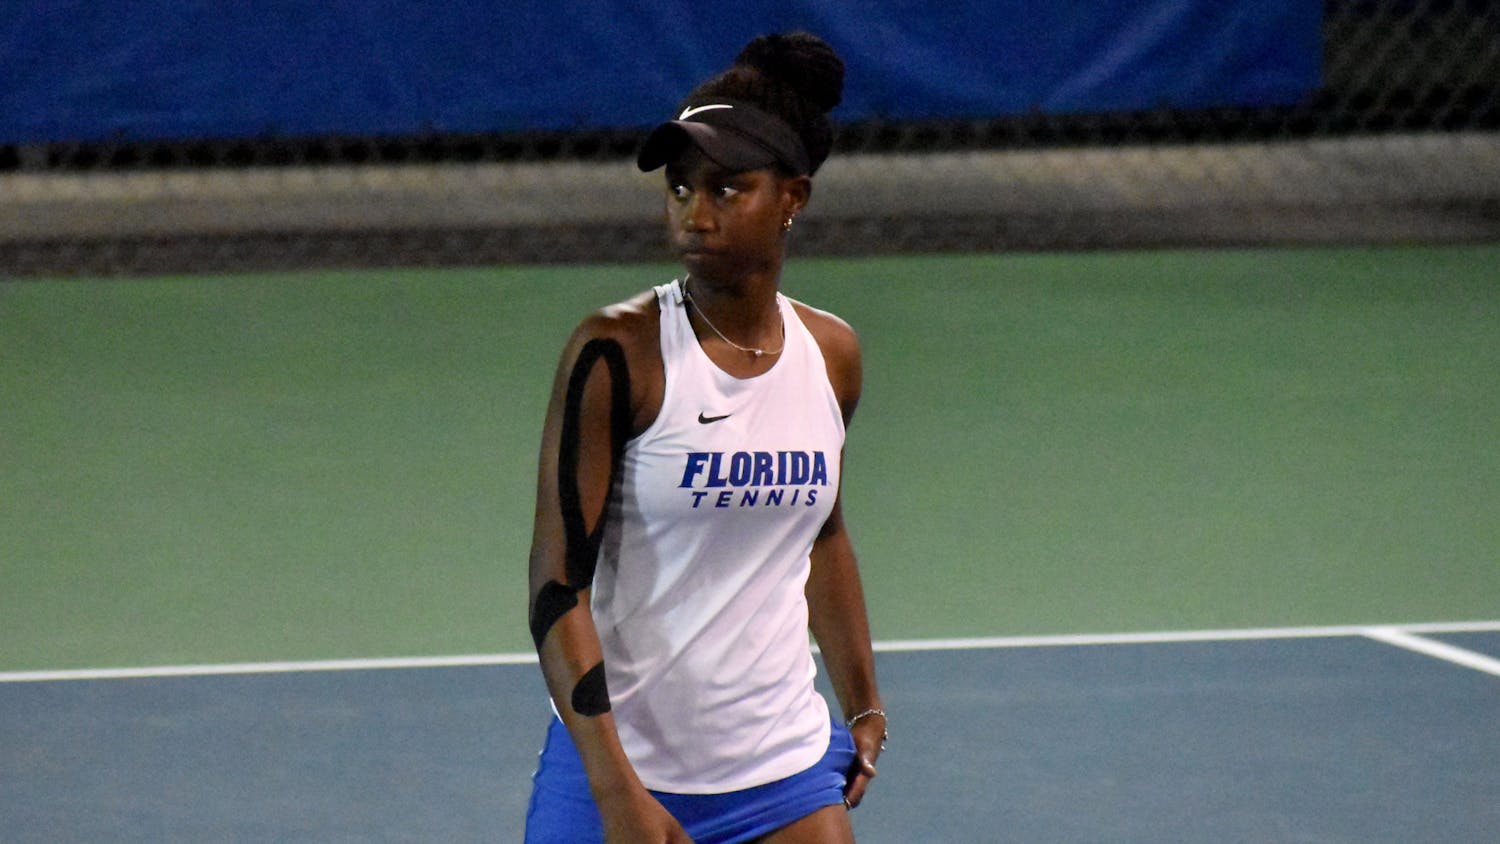 Florida senior Marlee Zein on the court during a match against UCF on Feb. 9, 2021. The No. 16 Gators surpassed Vanderbilt on the road Sunday, 6-1.